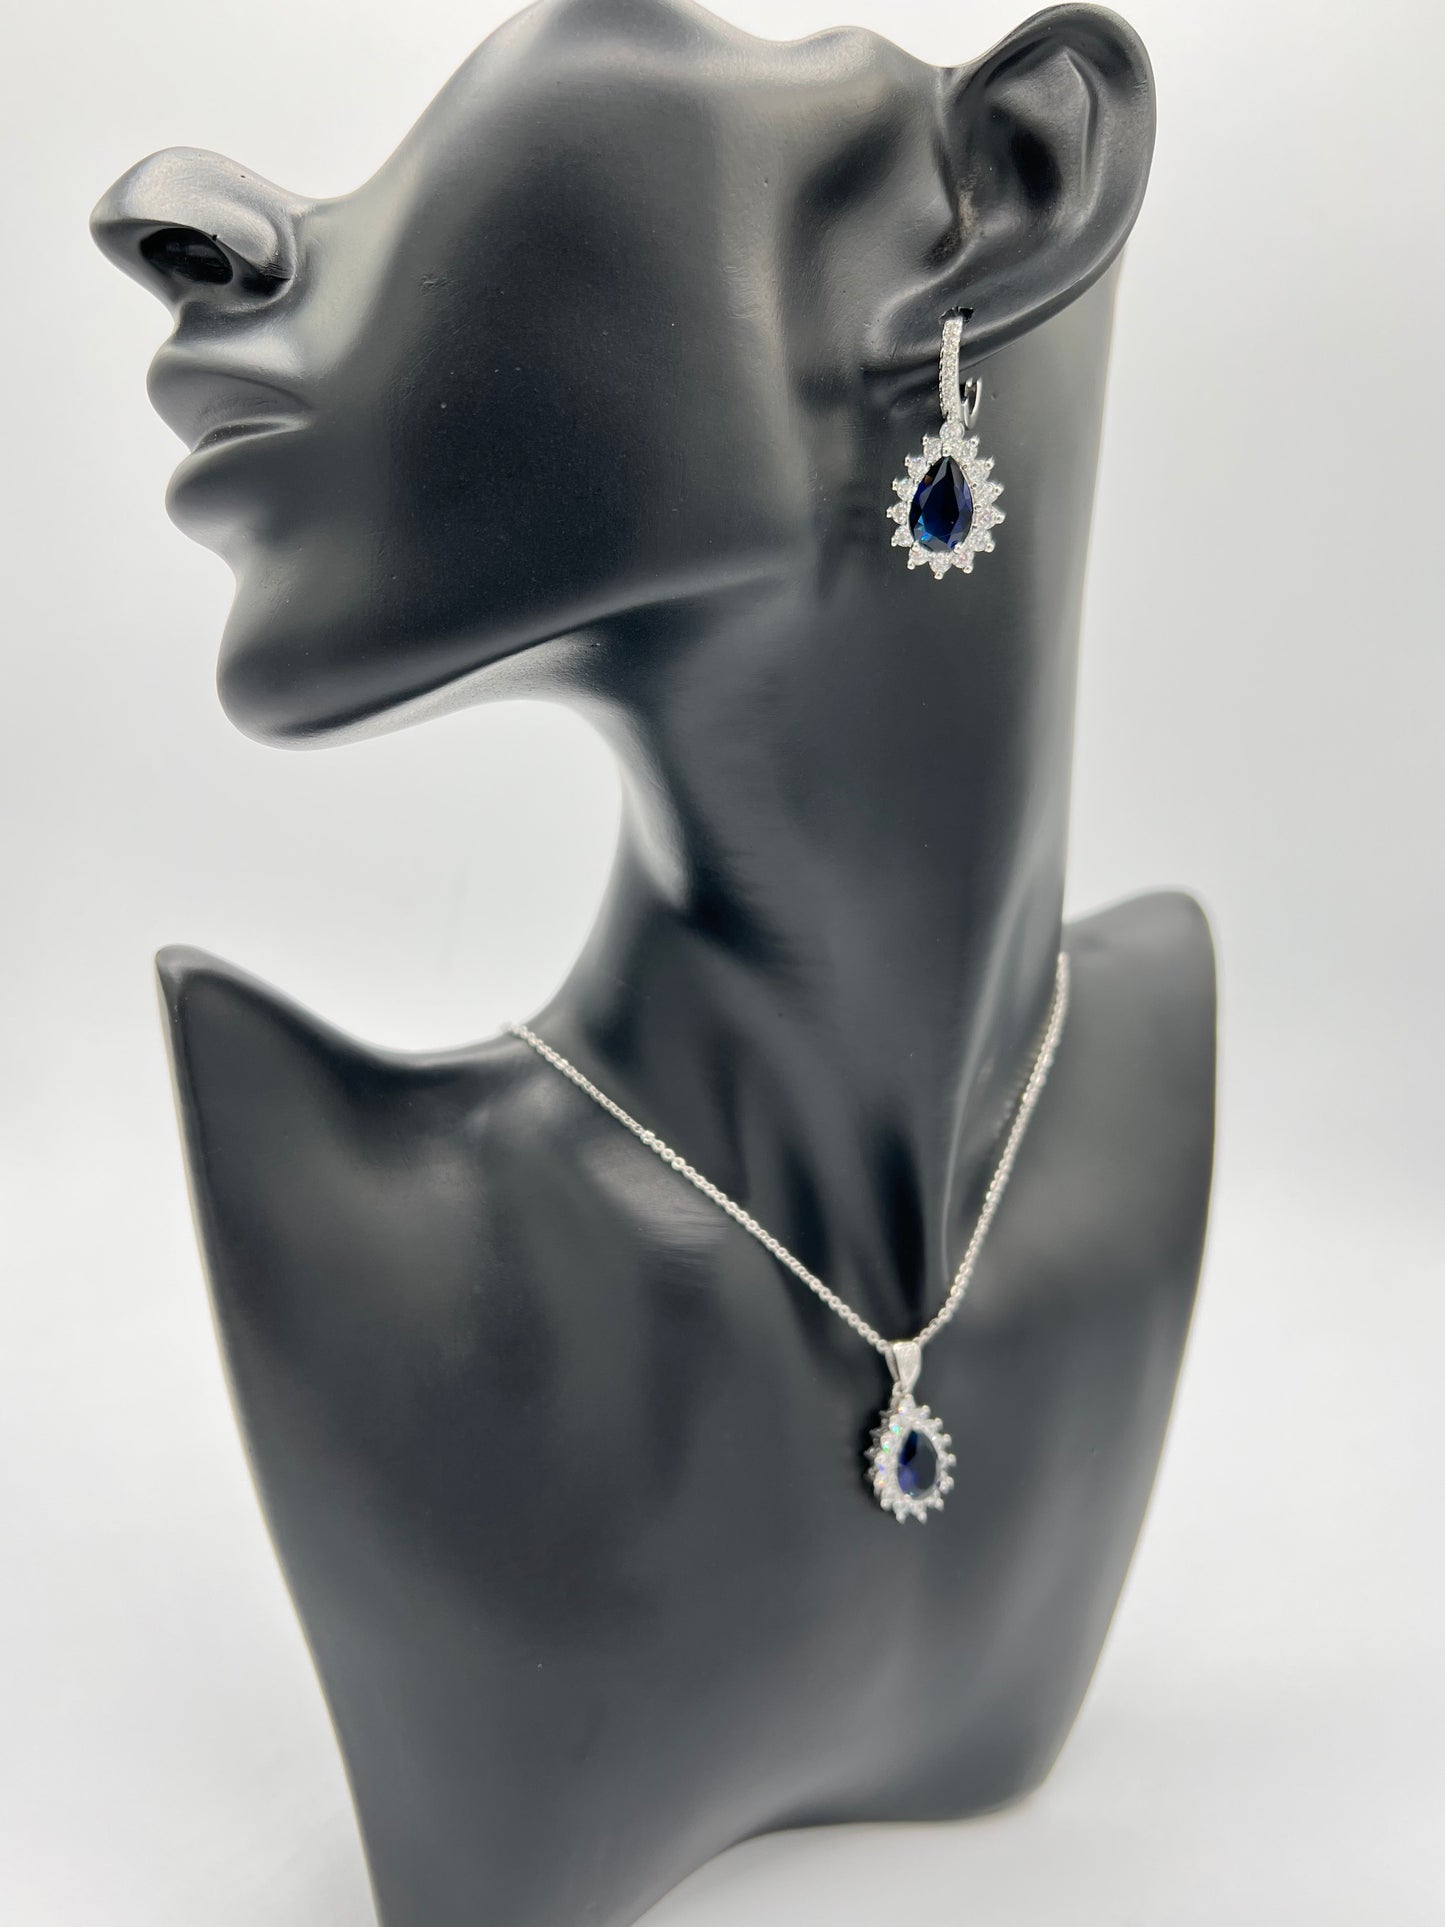 Tear Drop Shape Royal Design Earrings And Necklace Sets